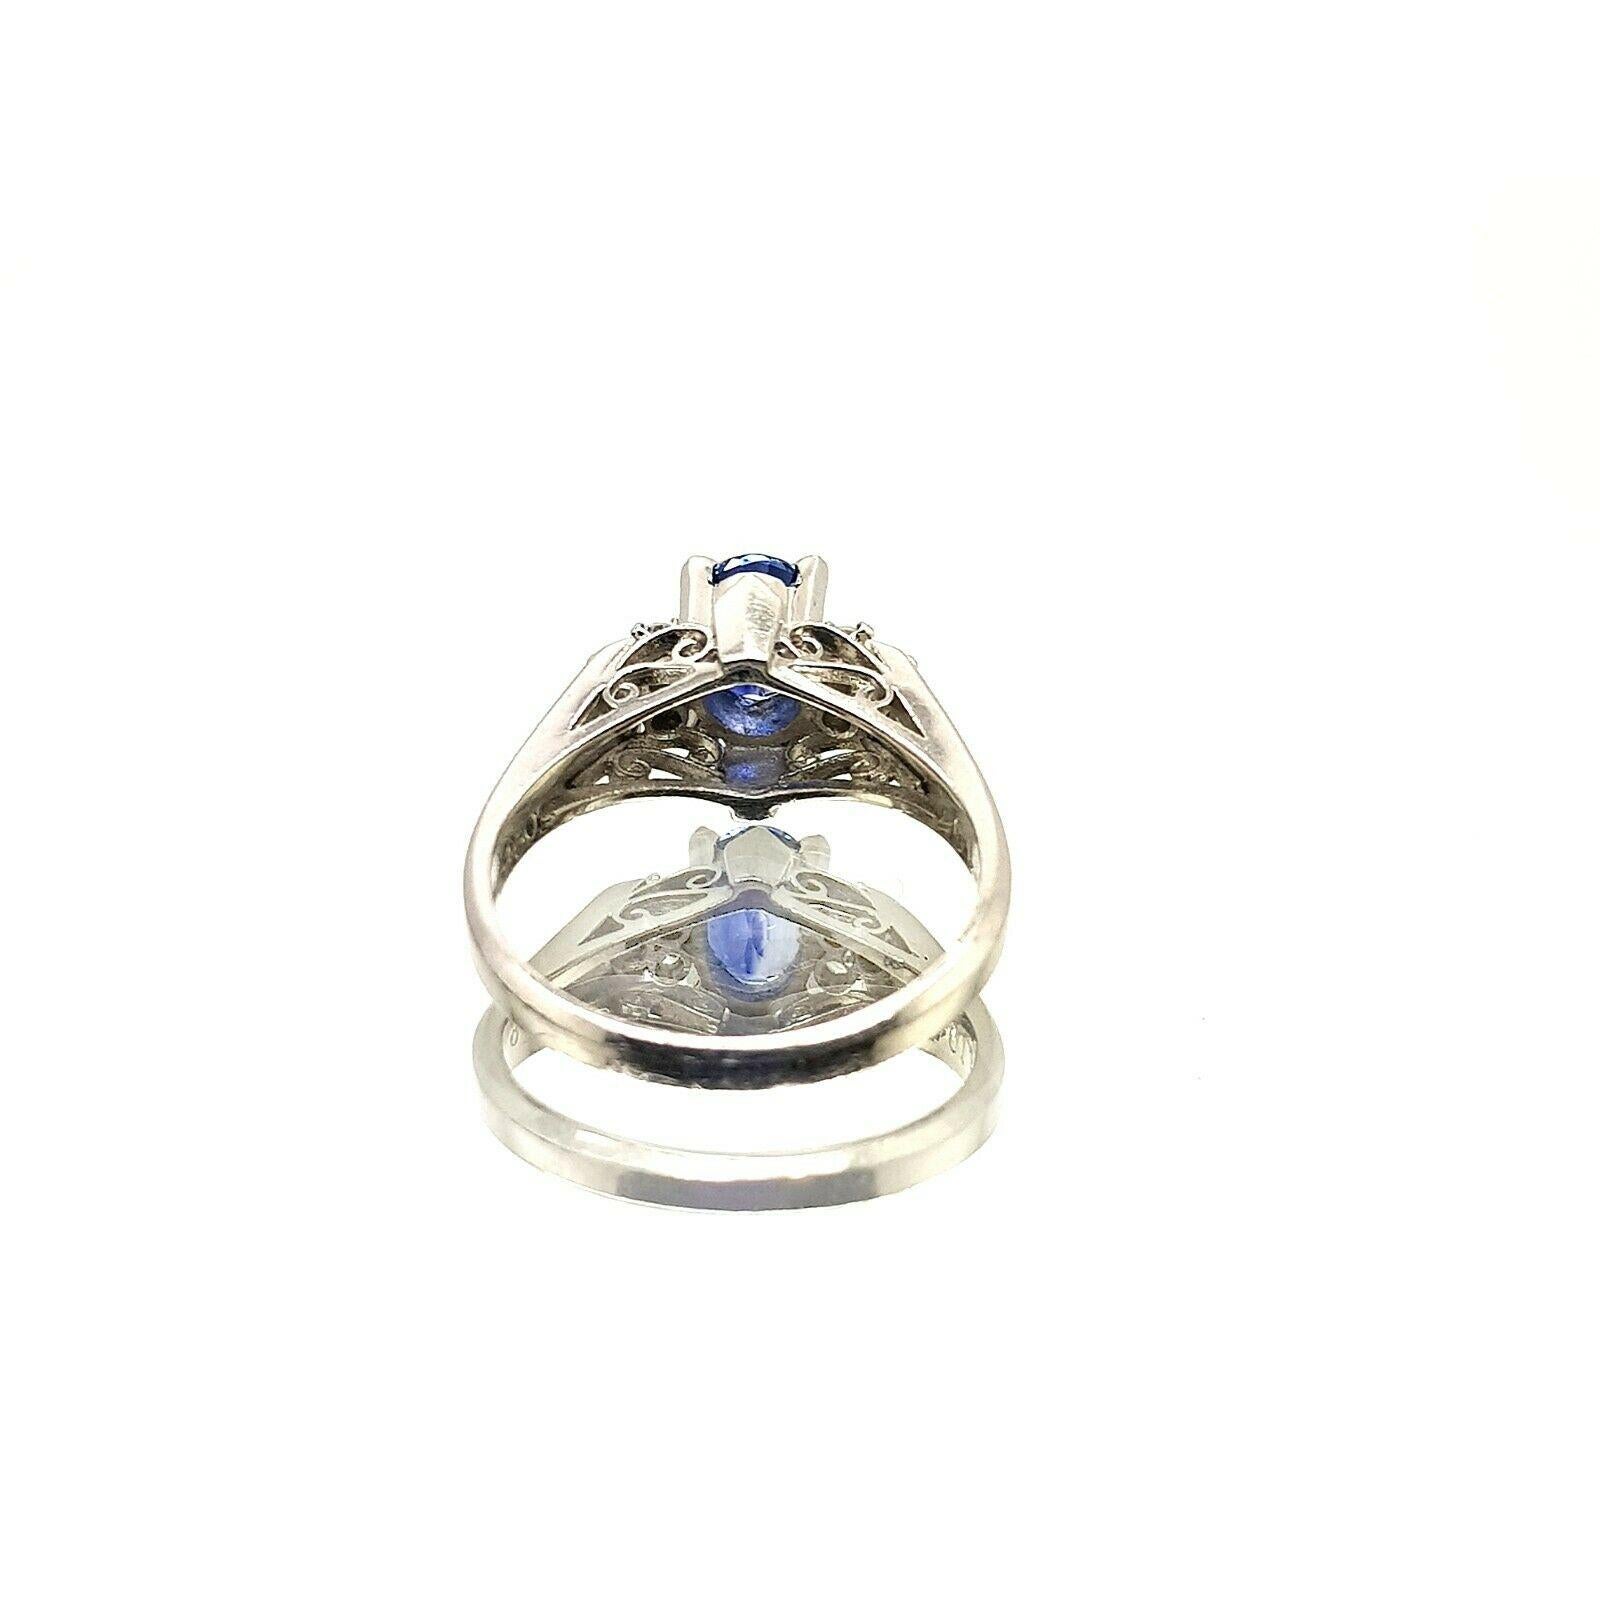  Specifications:
    main stone: BLUE SAPPHIRE  0.98 ct
    additional: ROUND AND BAGUETTE DIAMONDS
    diamonds: 6 PCS
    carat total weight: 0.13
    color: n/a
    clarity: n/a
    brand: custom
    metal: PLATINUM PT900
    type:
    weight: